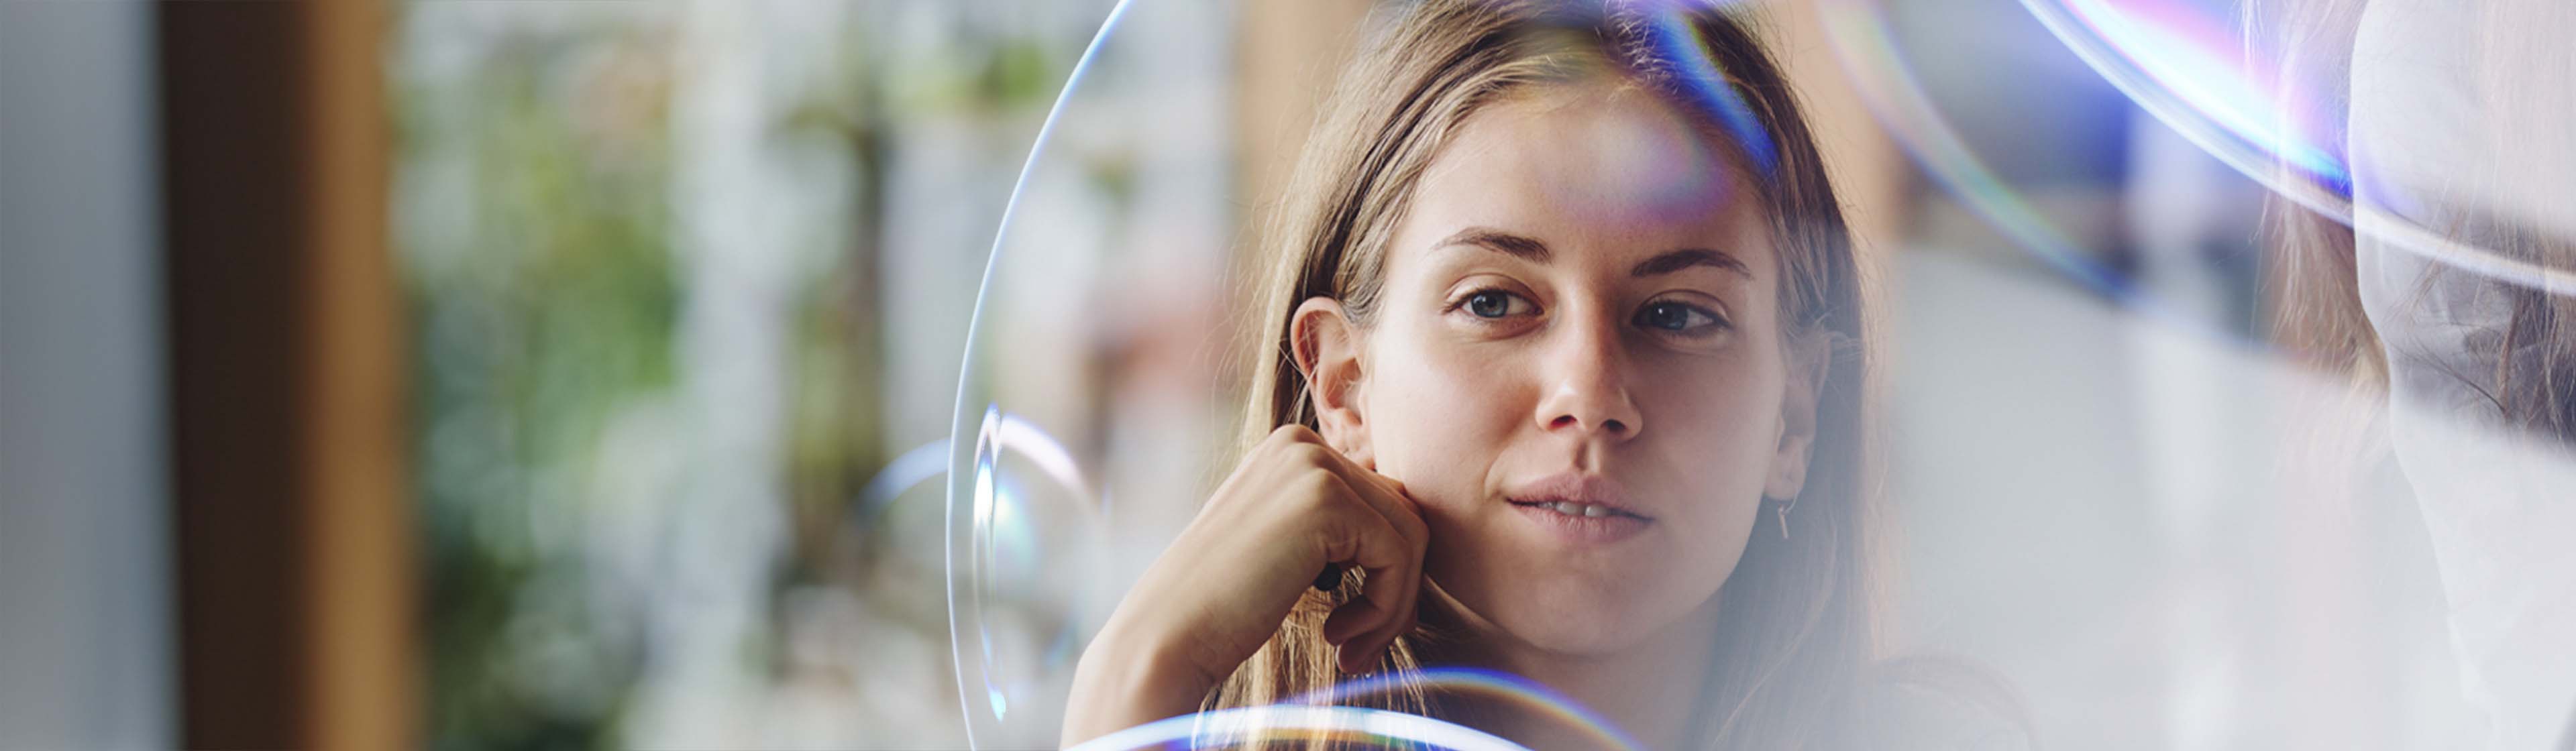 A young woman in thought viewed through the Datacom lens